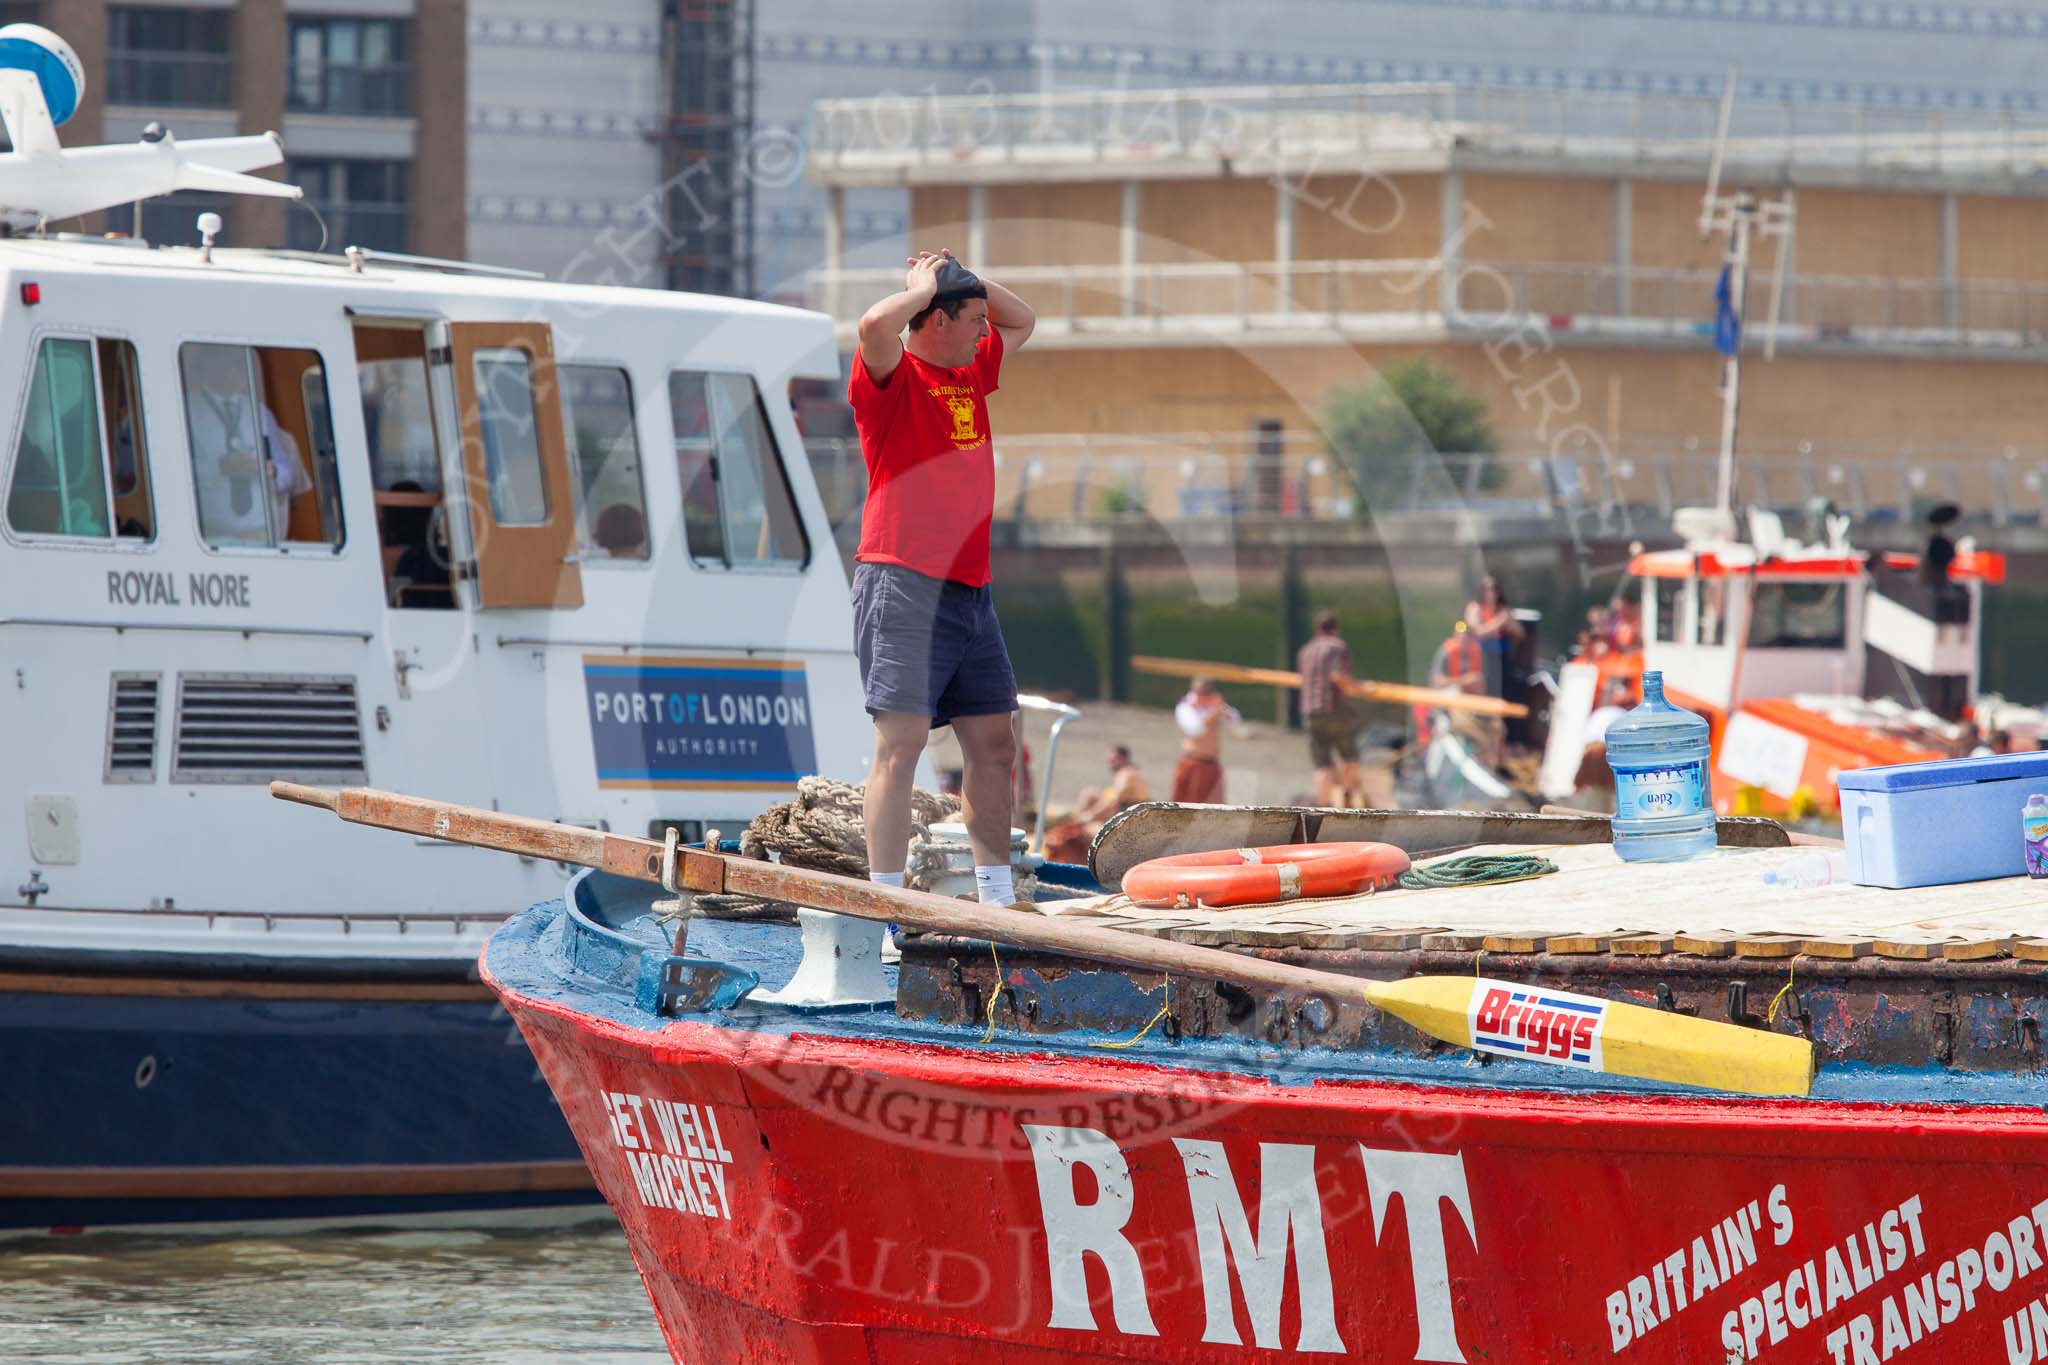 TOW River Thames Barge Driving Race 2013: Barge "Jane", by the RMT Union, close to Greenwich Pier, before the start of the race. In the background PLA boat "Royal Nore"..
River Thames between Greenwich and Westminster,
London,

United Kingdom,
on 13 July 2013 at 12:23, image #76